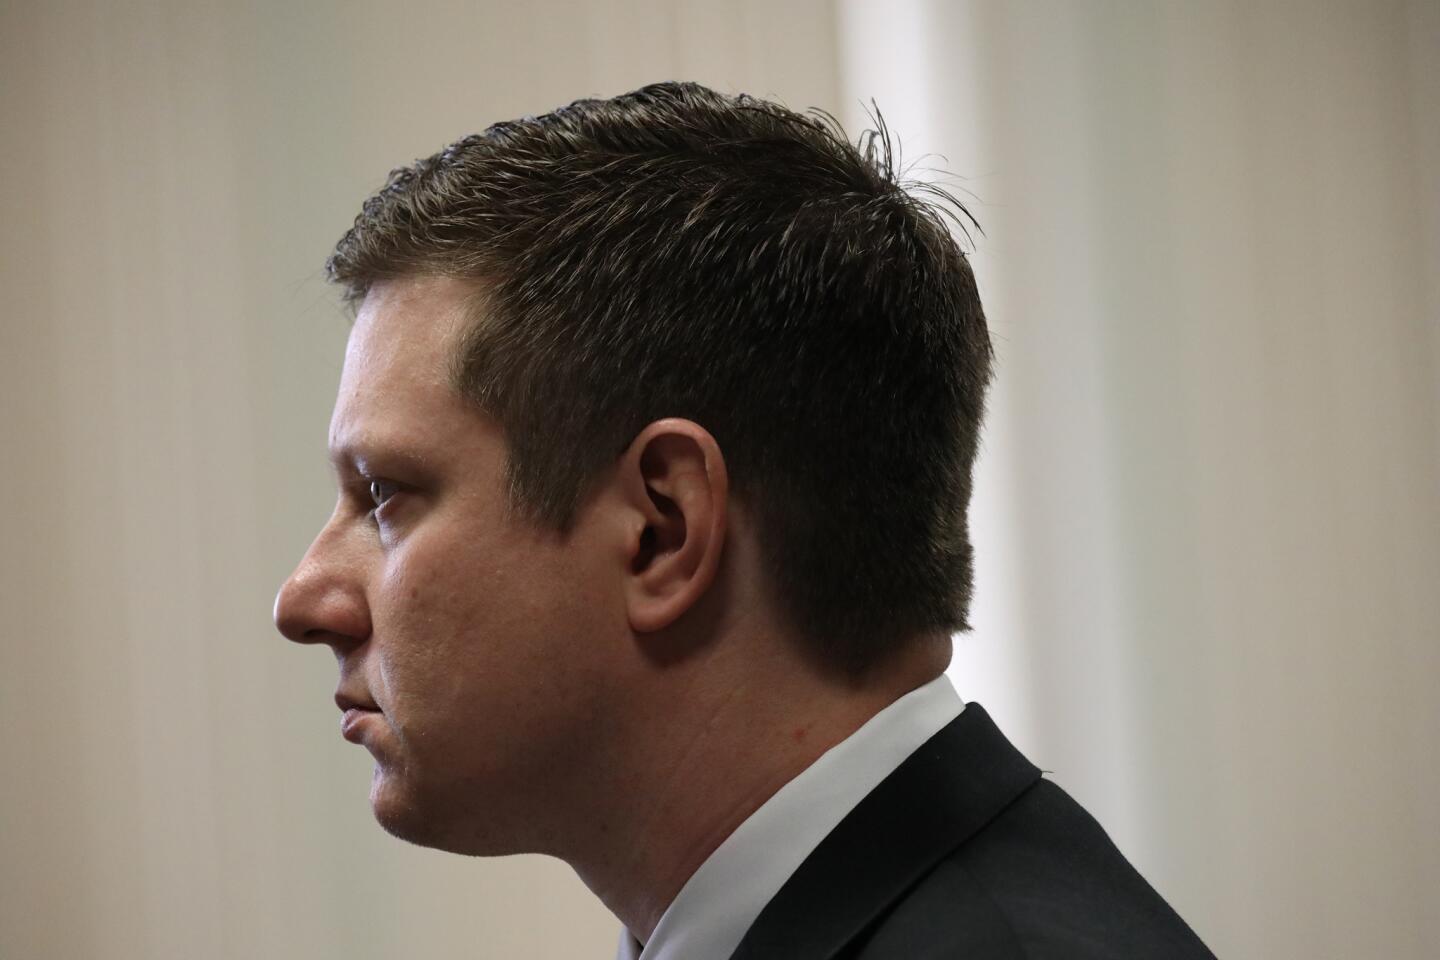 Jason Van Dyke attends a hearing in front of Judge Vincent Gaughan at the Leighton Criminal Courts Building in Chicago on March 23, 2017.